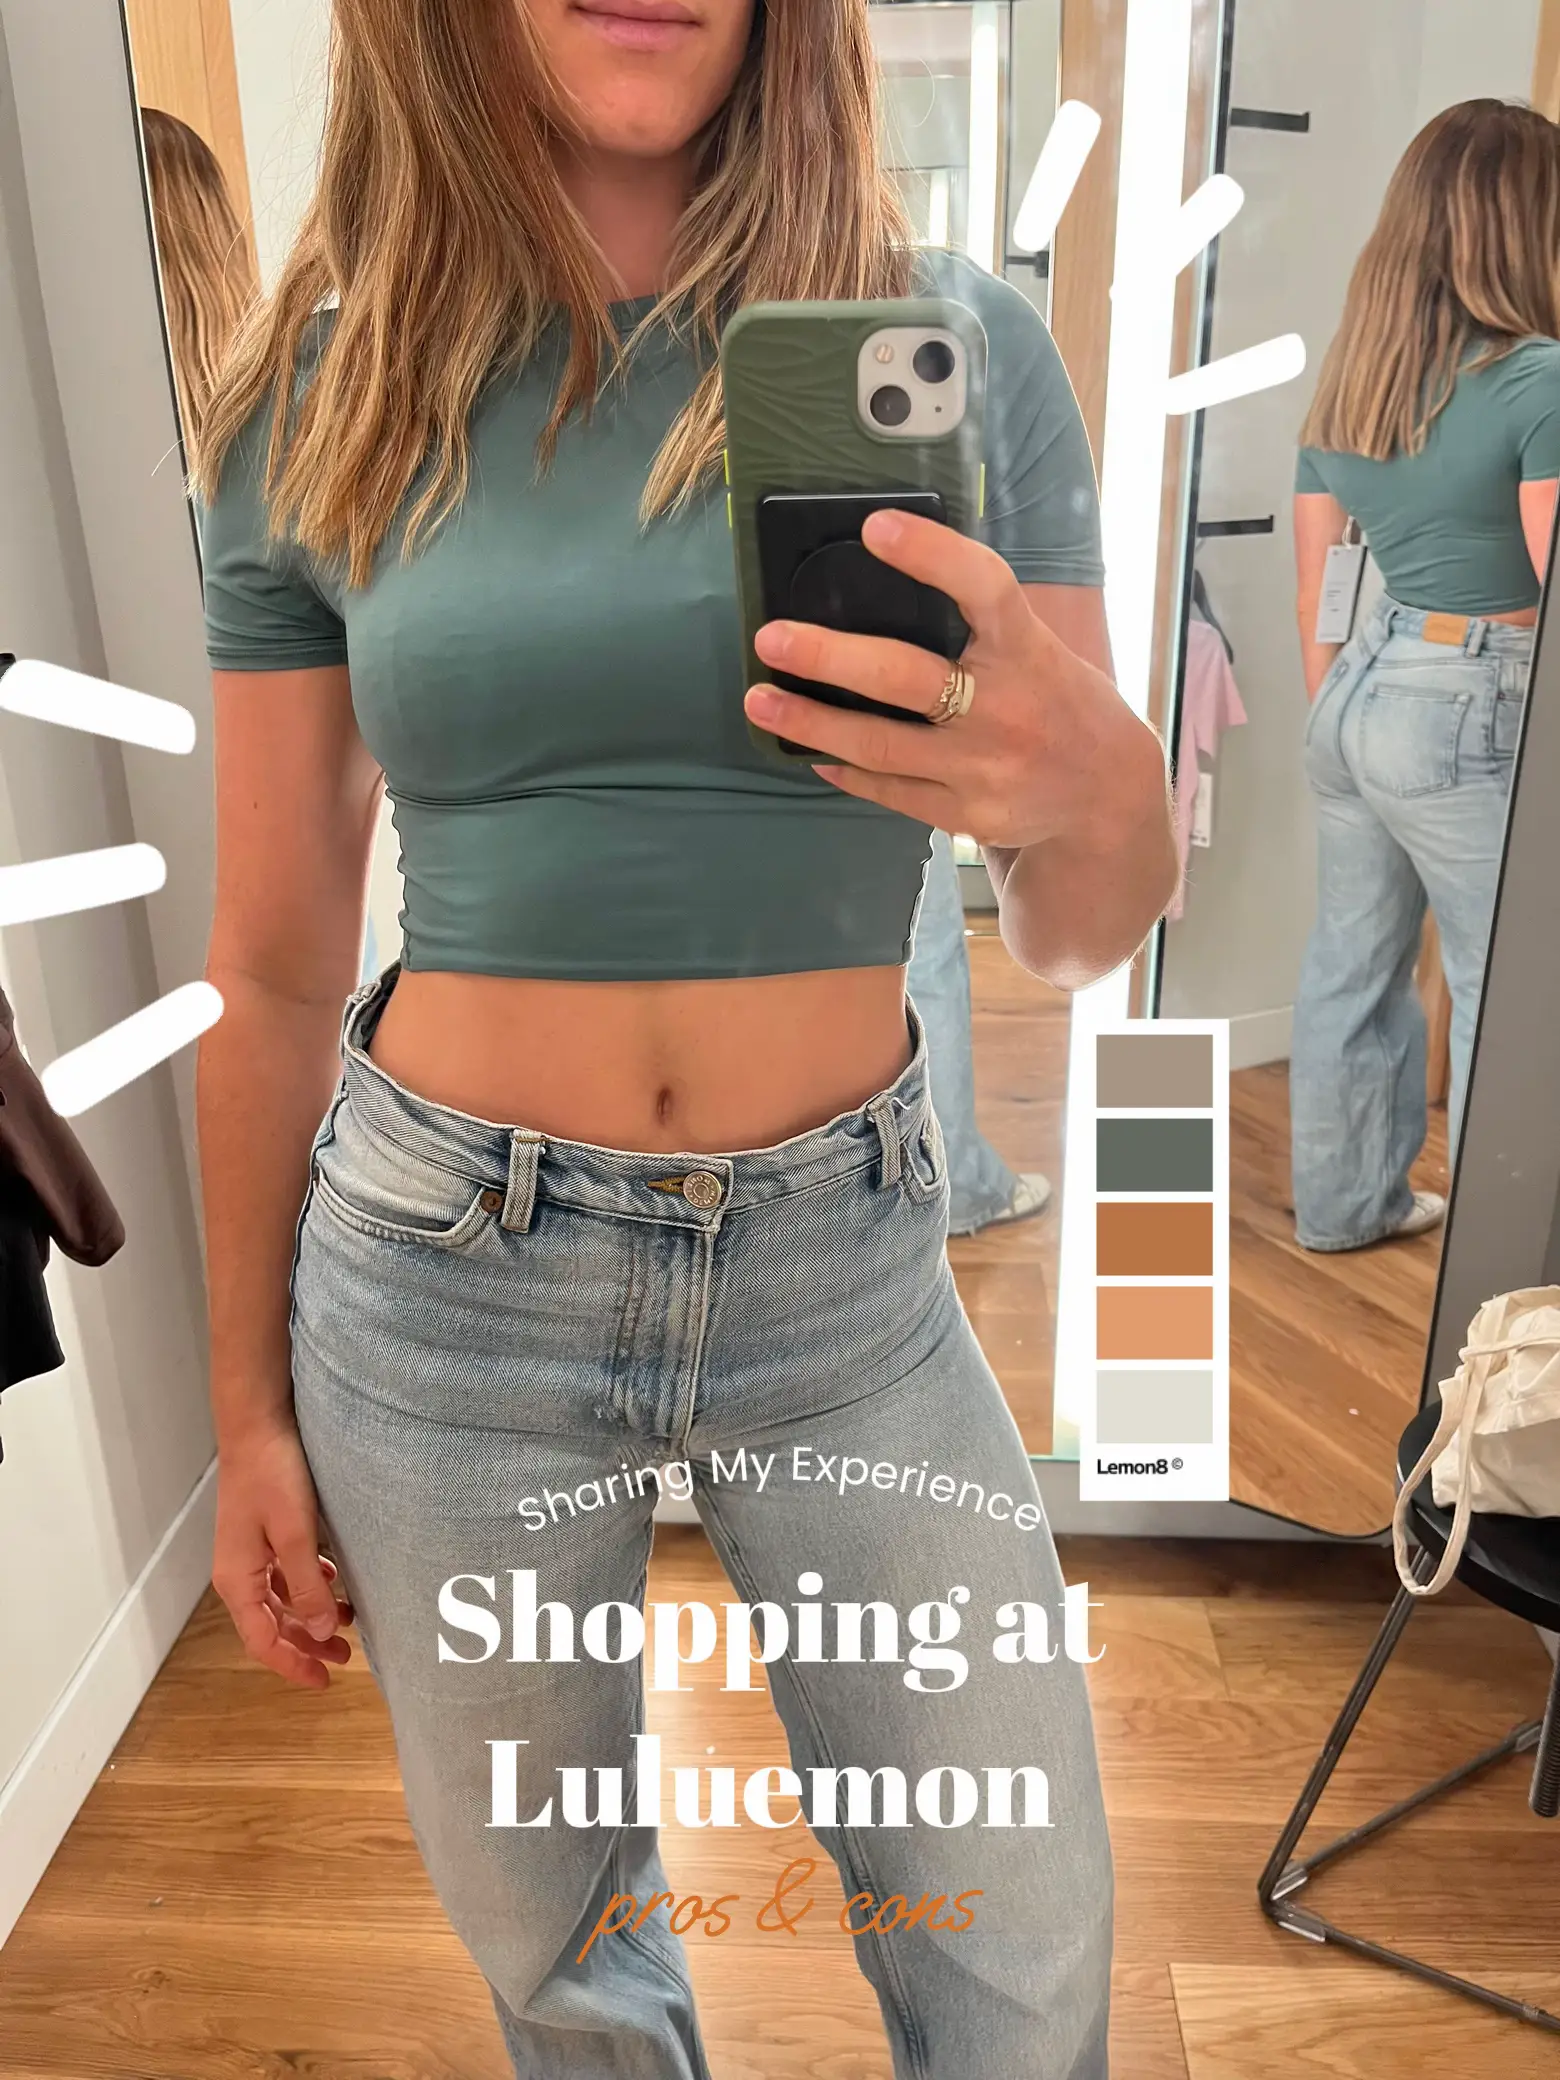 Lululemon Haul🍋, Gallery posted by Mia🦋